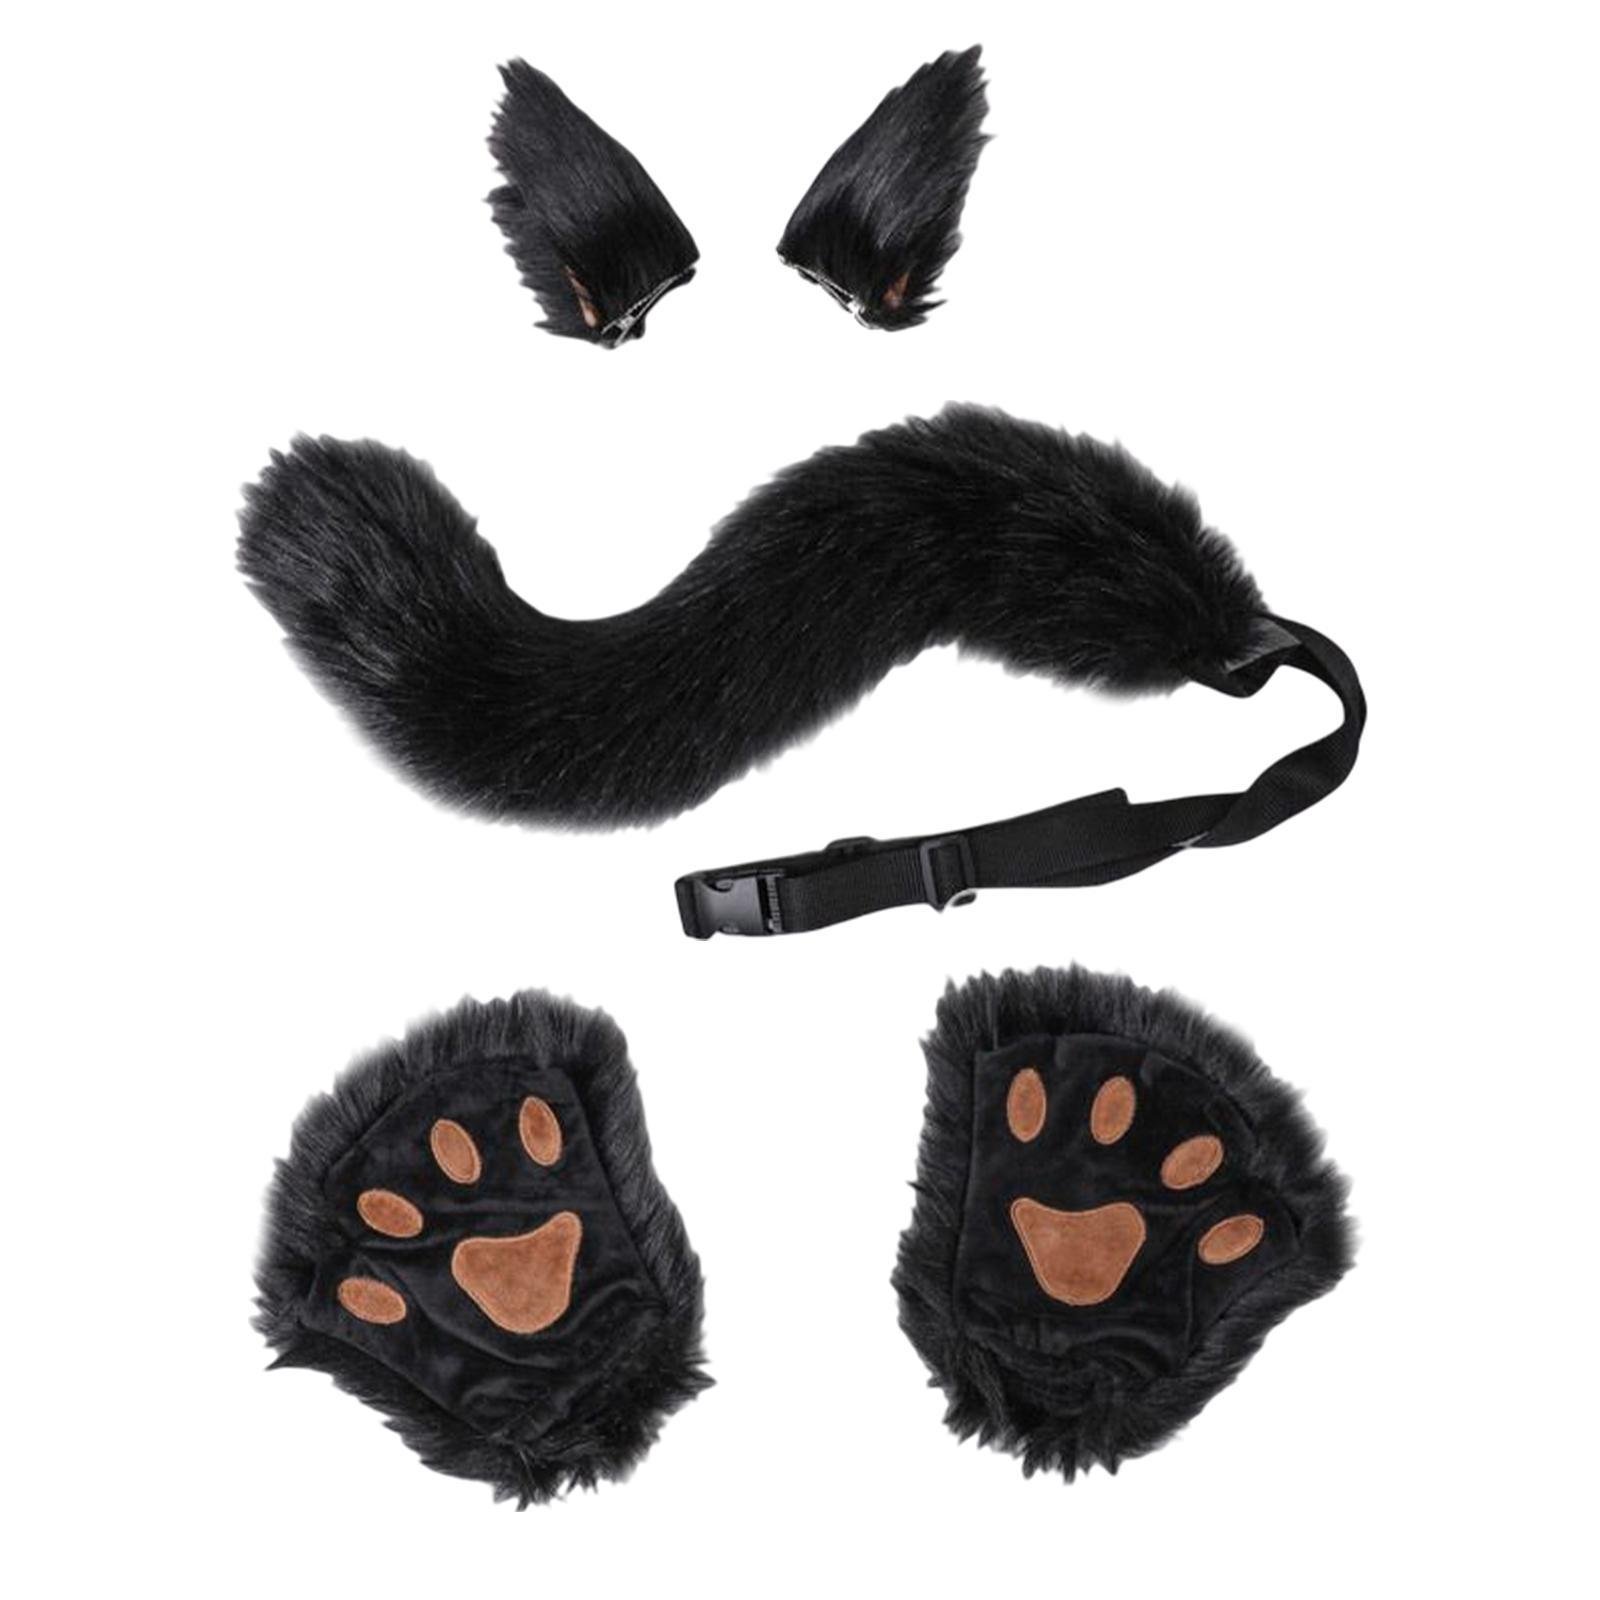 Costume Accessories Set Animal Ears Headband for Halloween Cosplay Fancy Dress Up Adult Kids Party Costume